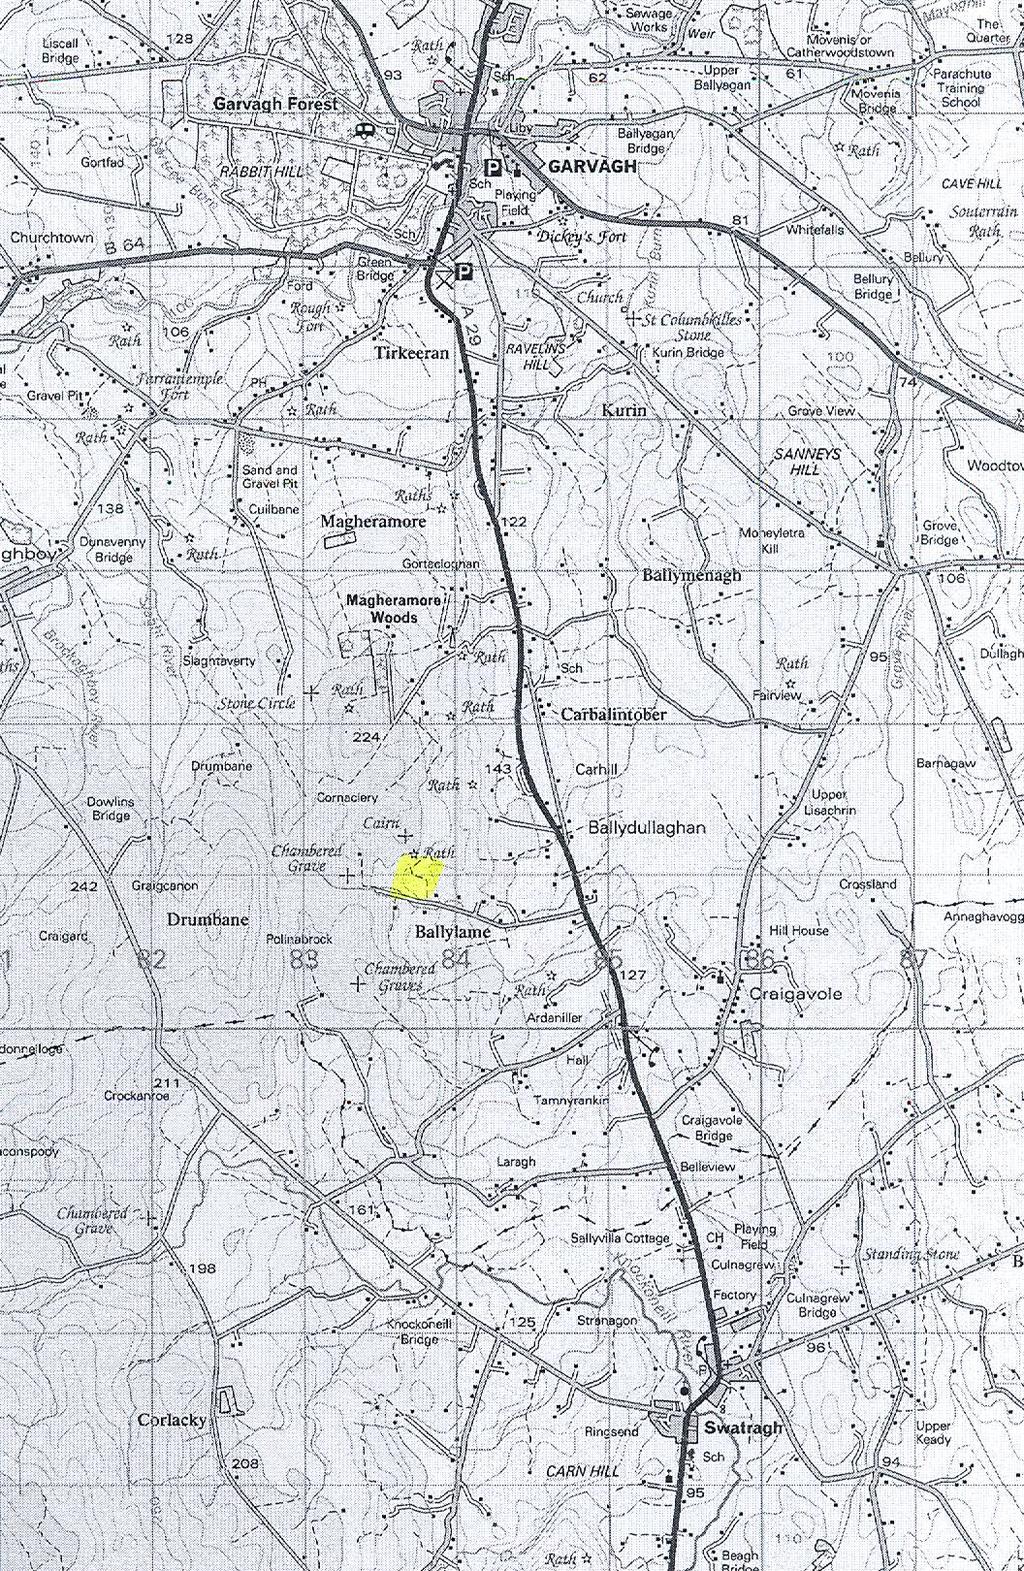 Figure 2: Detailed location map showing the position of the townland of Ballydullaghan between